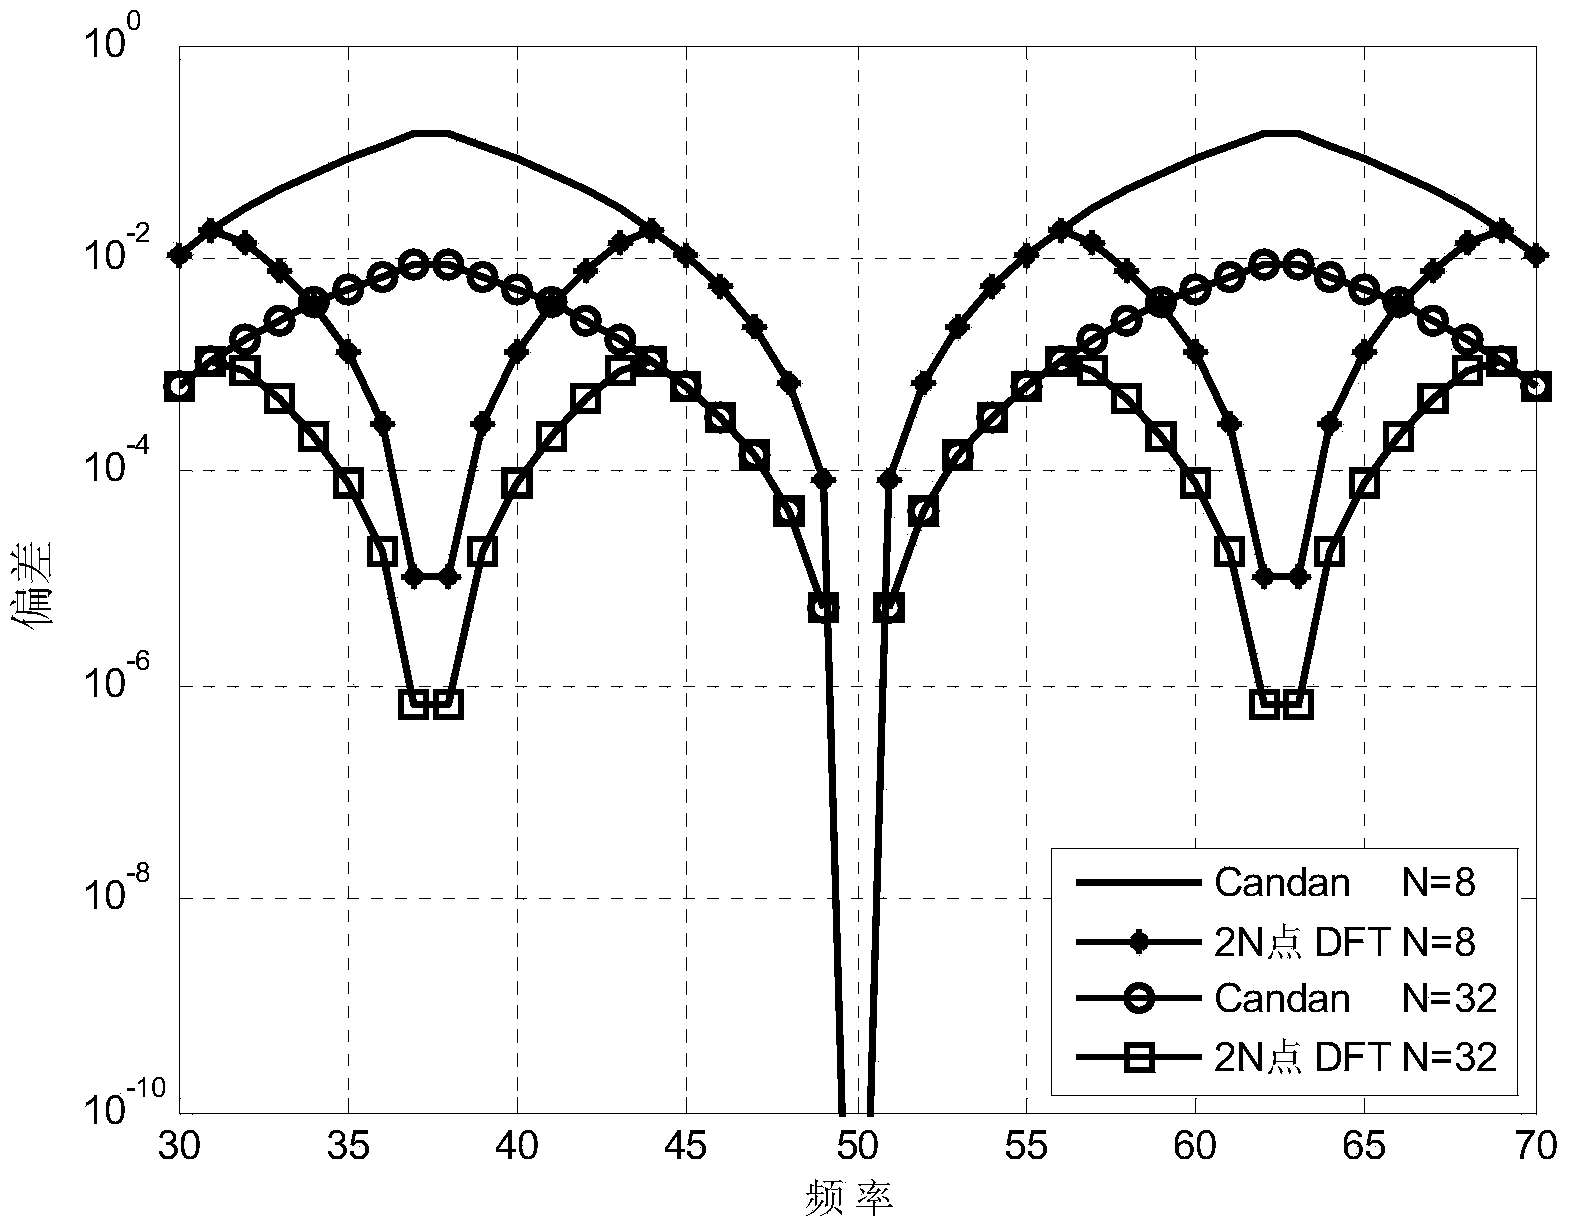 Method for estimating sinusoidal signal frequency based on DFT